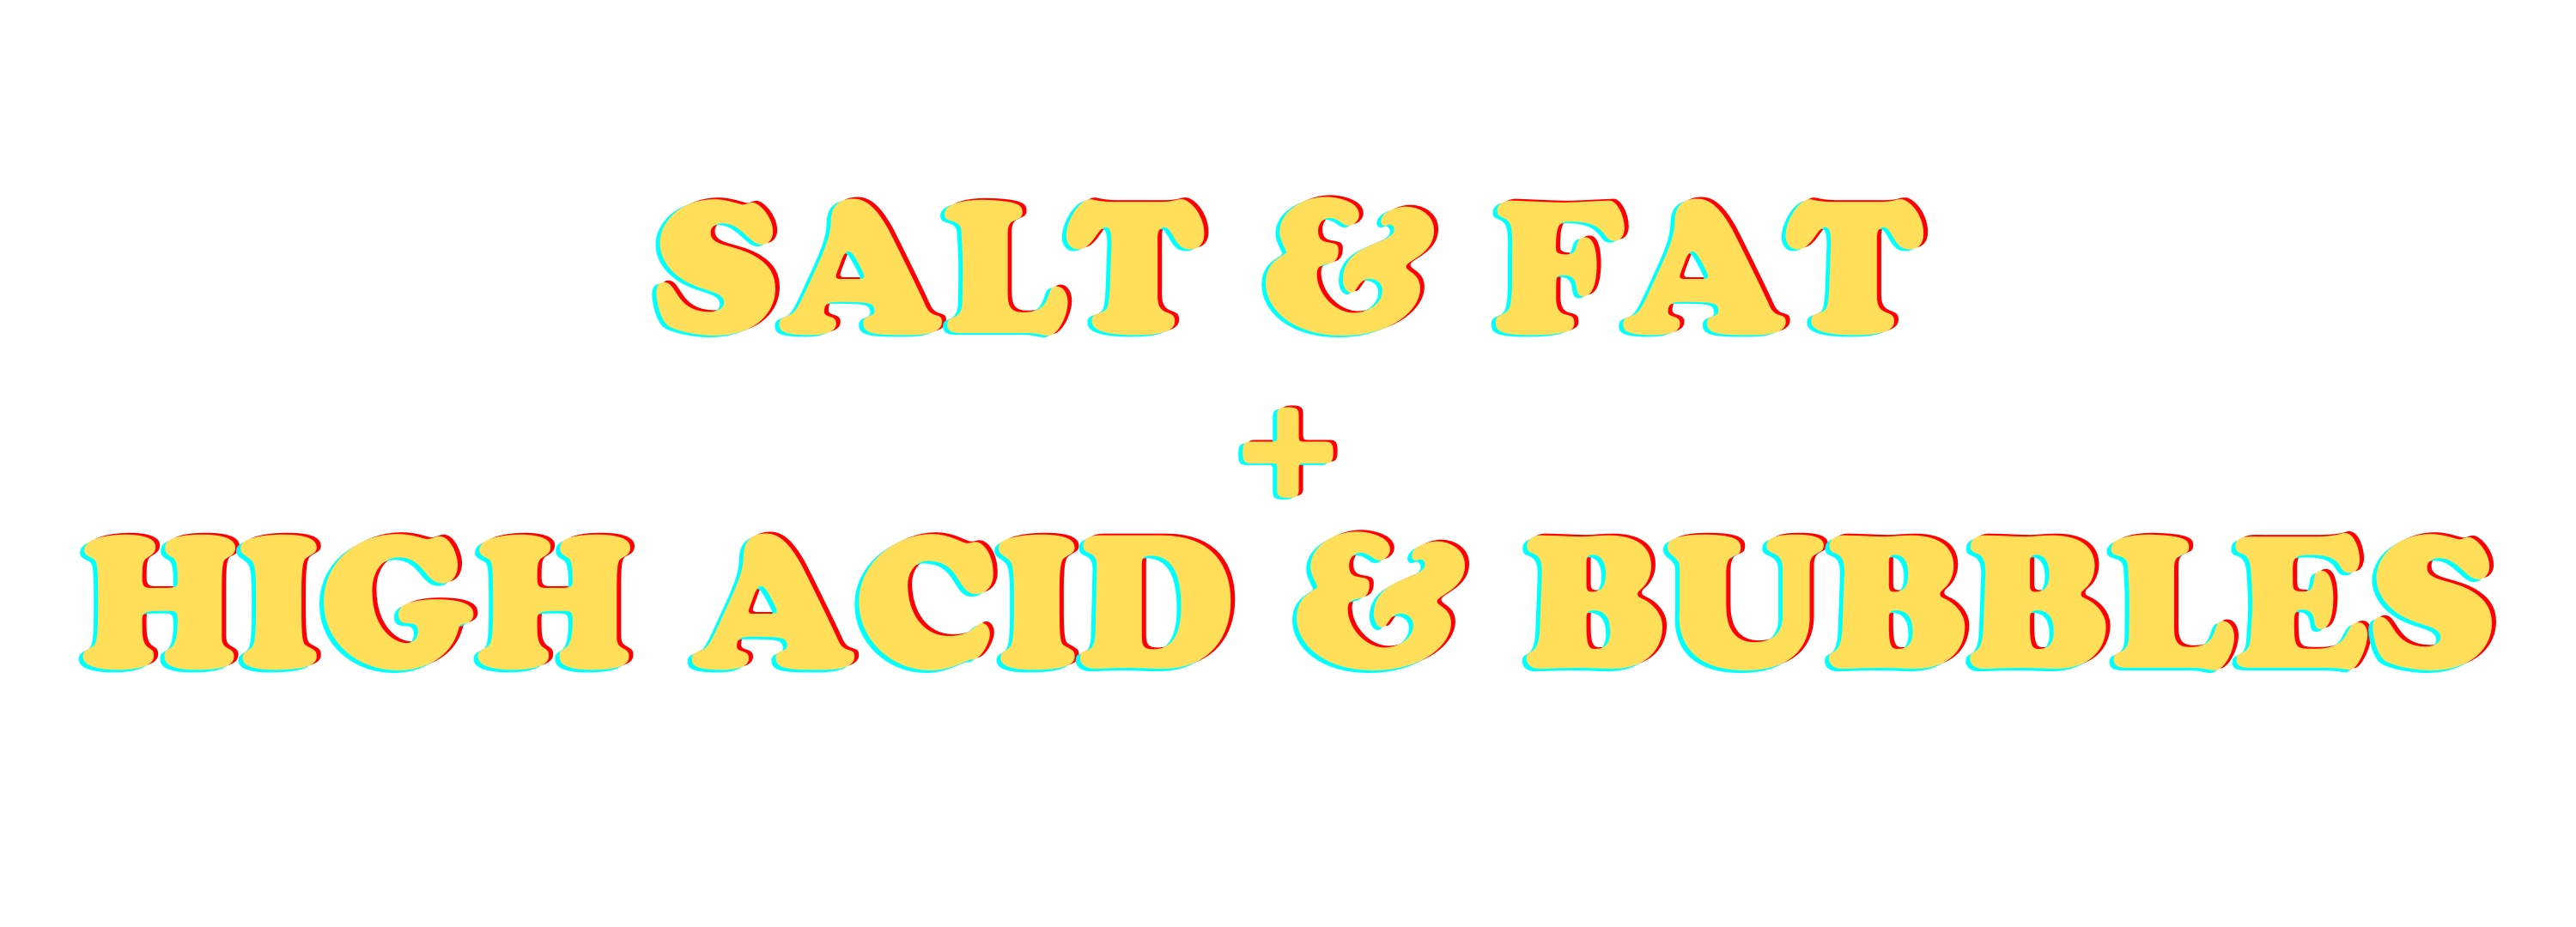 salt and fat + high acid and bubbles